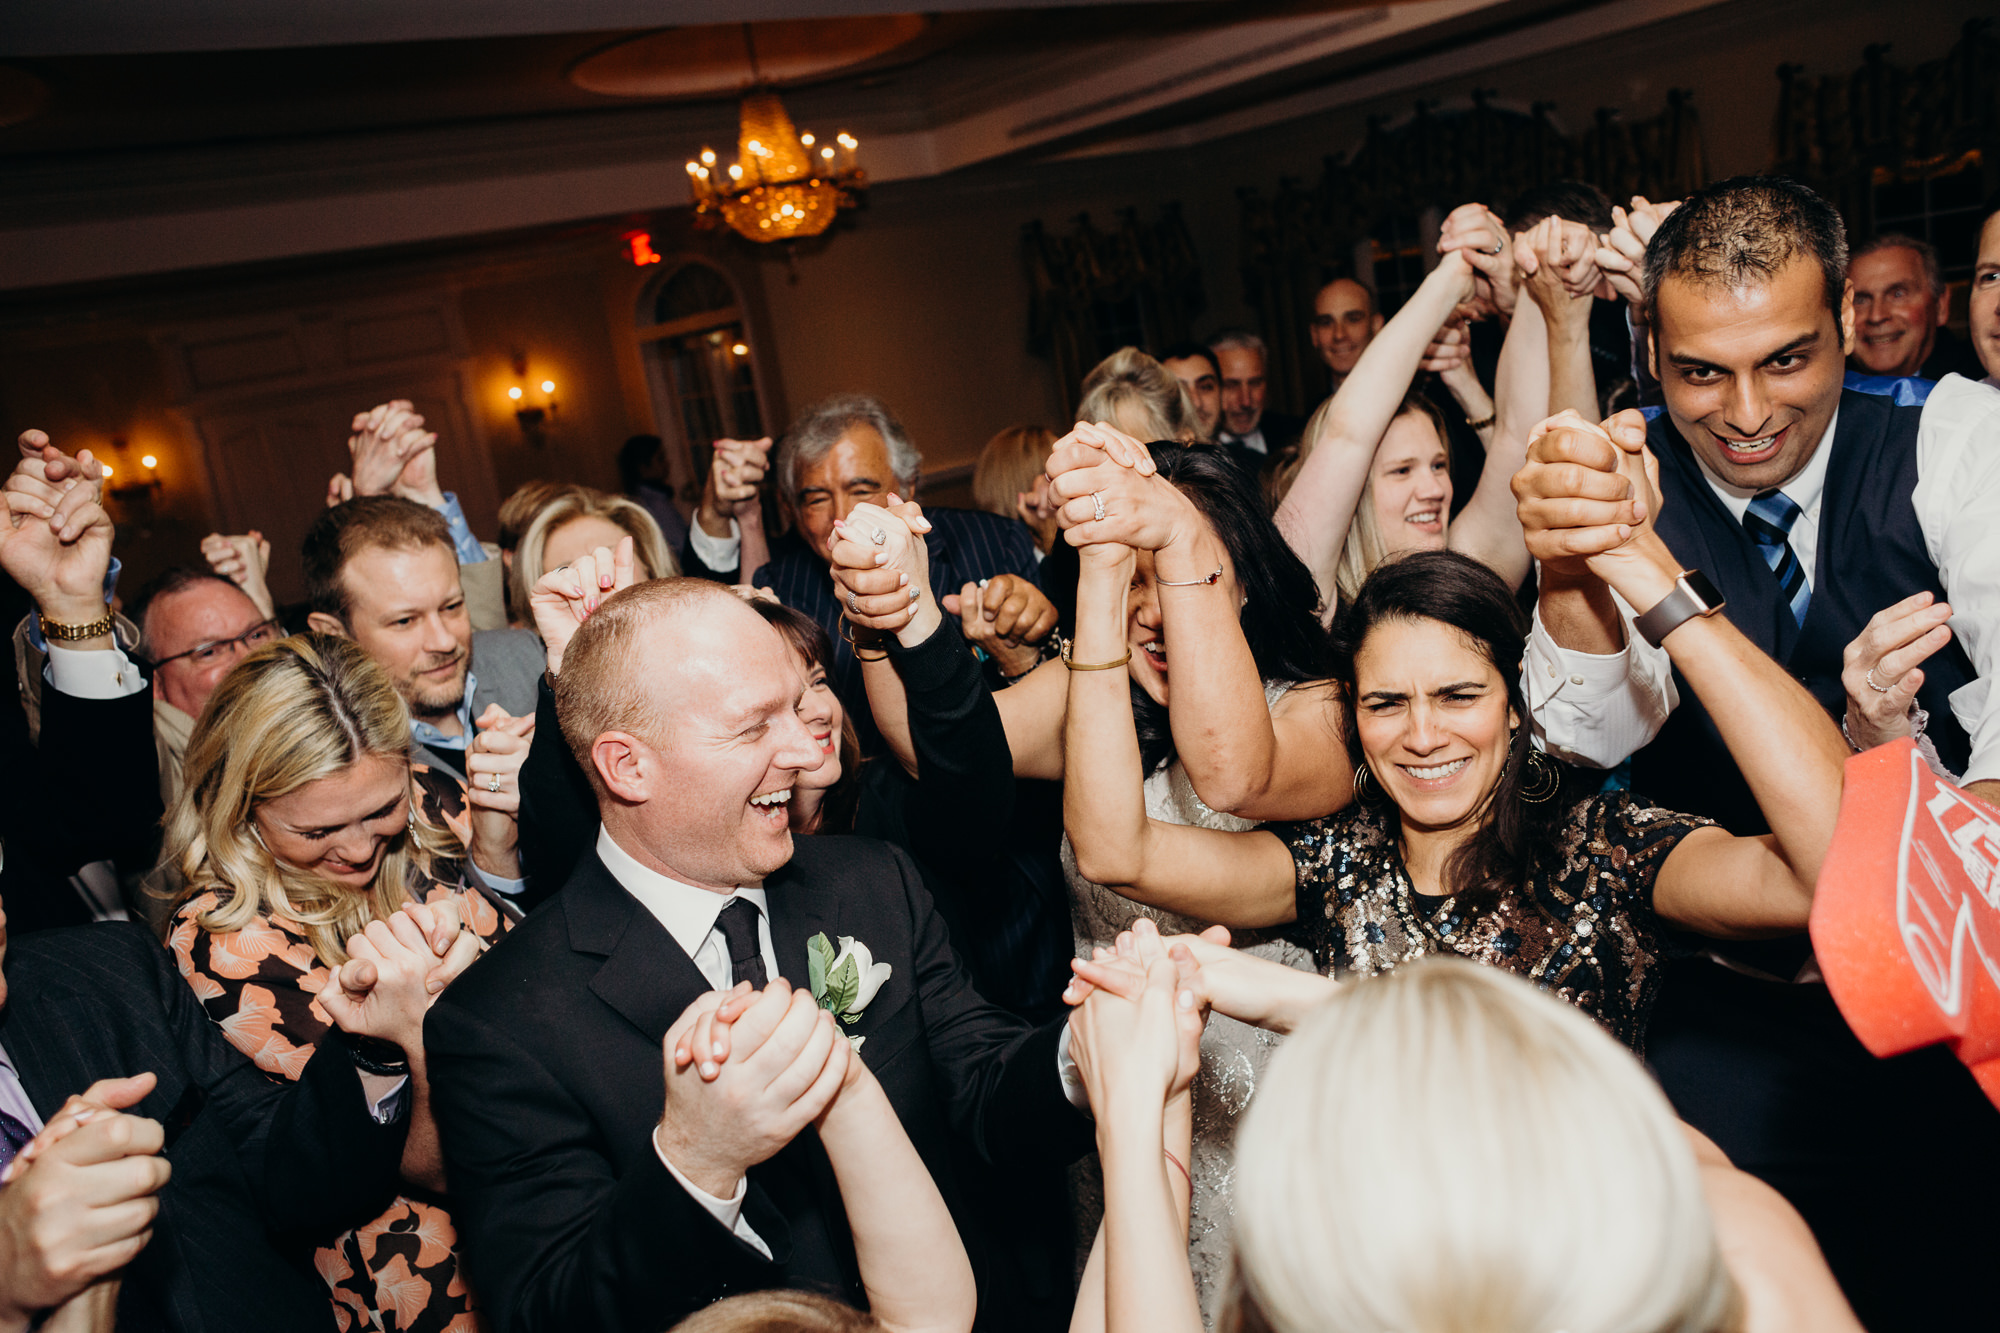 wedding guests dance at the reception at the upper montclair country club in montclair, new jersey